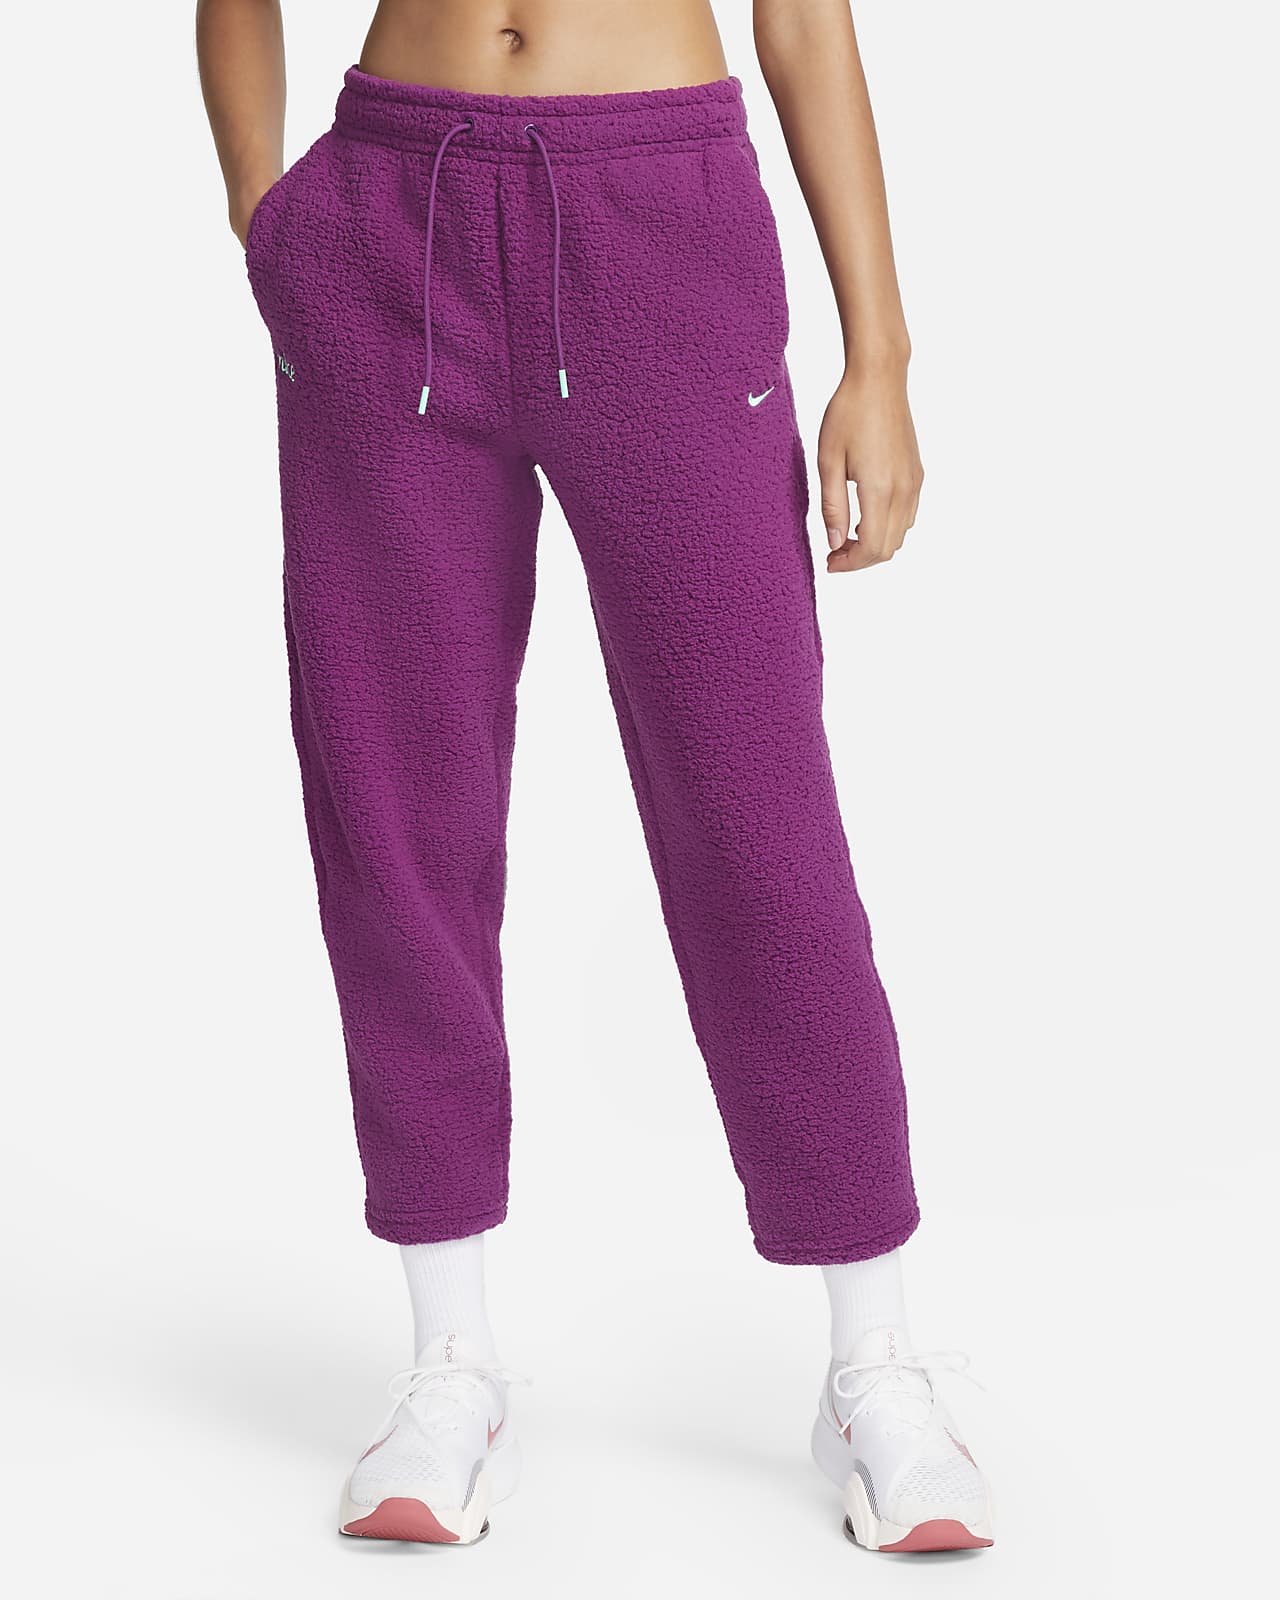 Nike Therma-FIT Women's Trousers